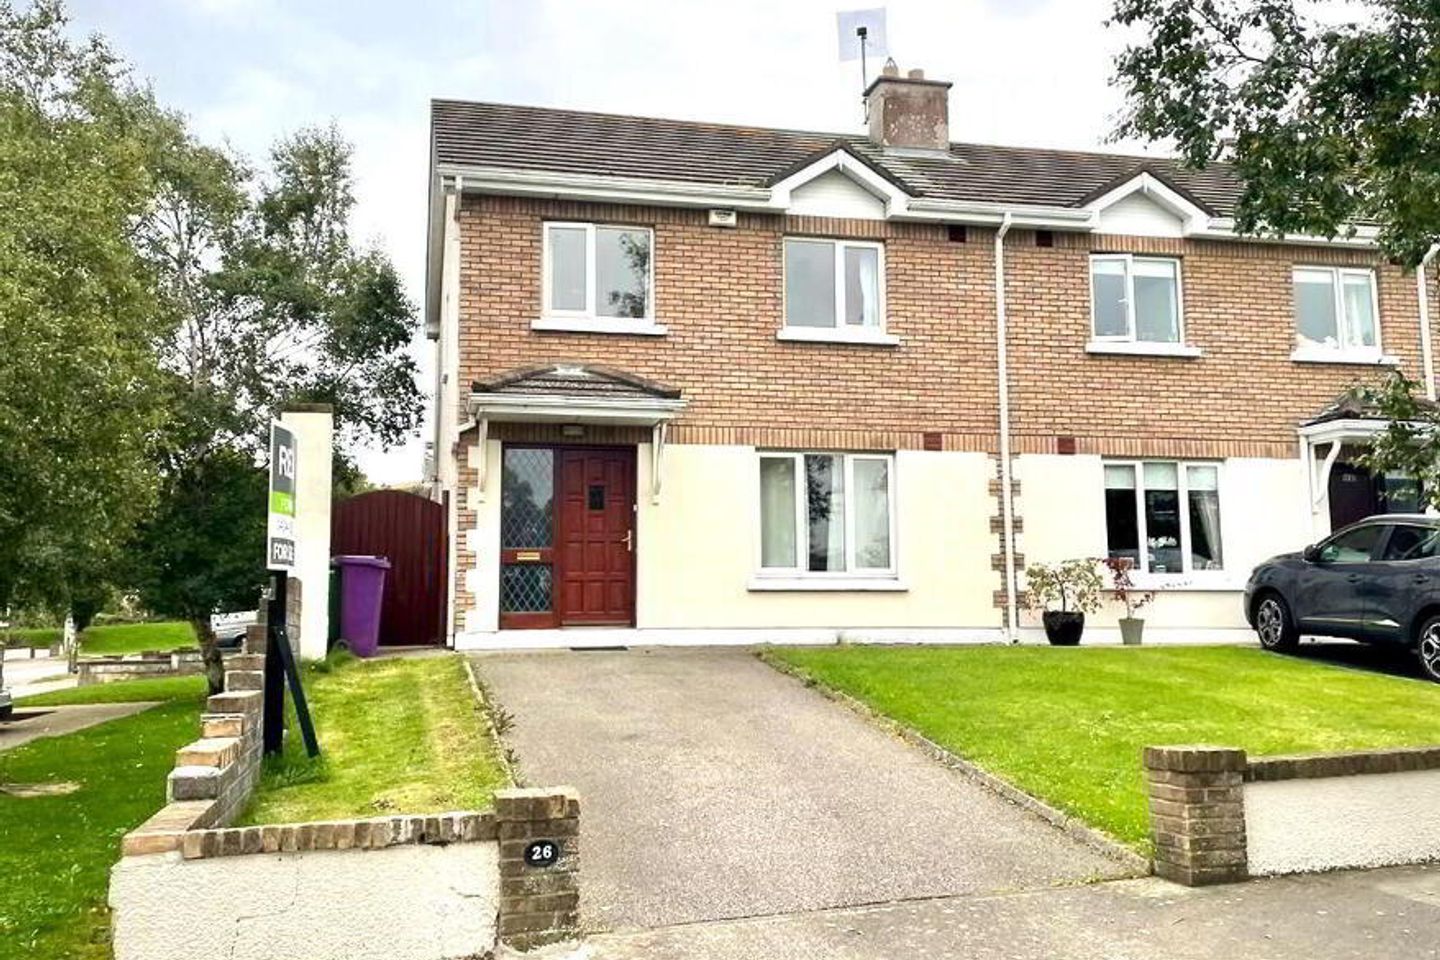 26 Springfield Court, Wicklow Town, Co. Wicklow